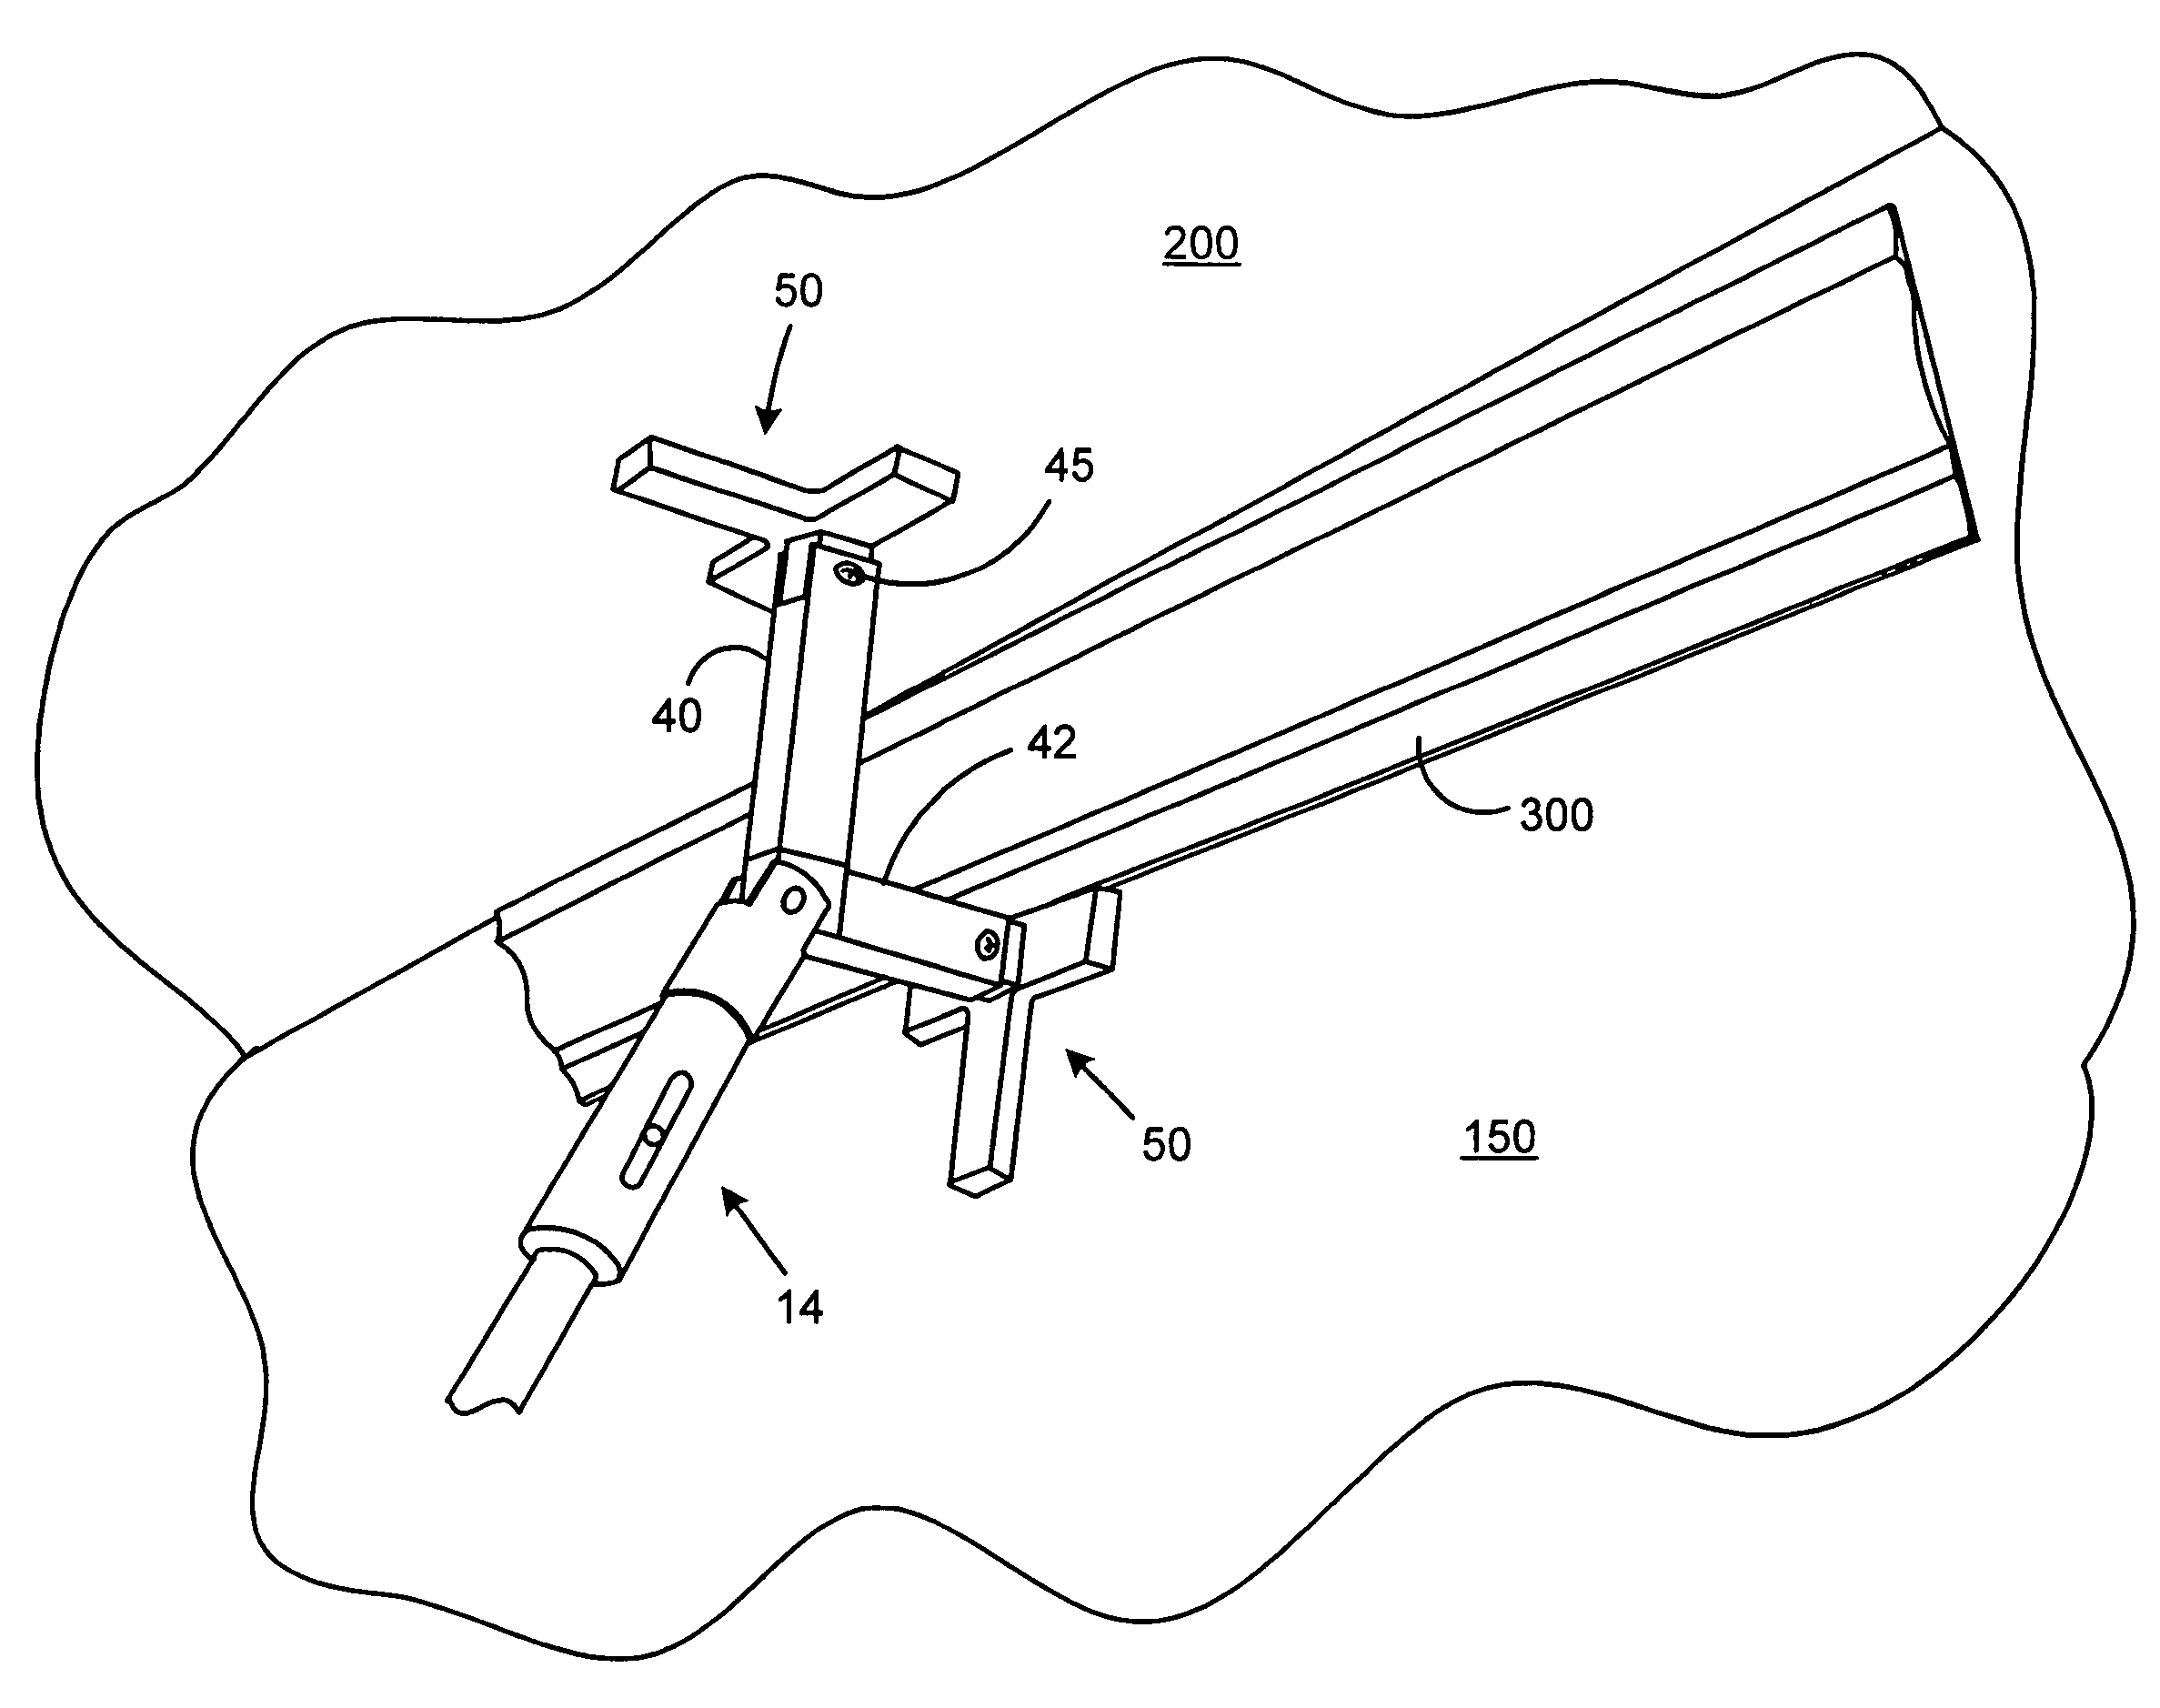 Apparatus for supporting molding pieces